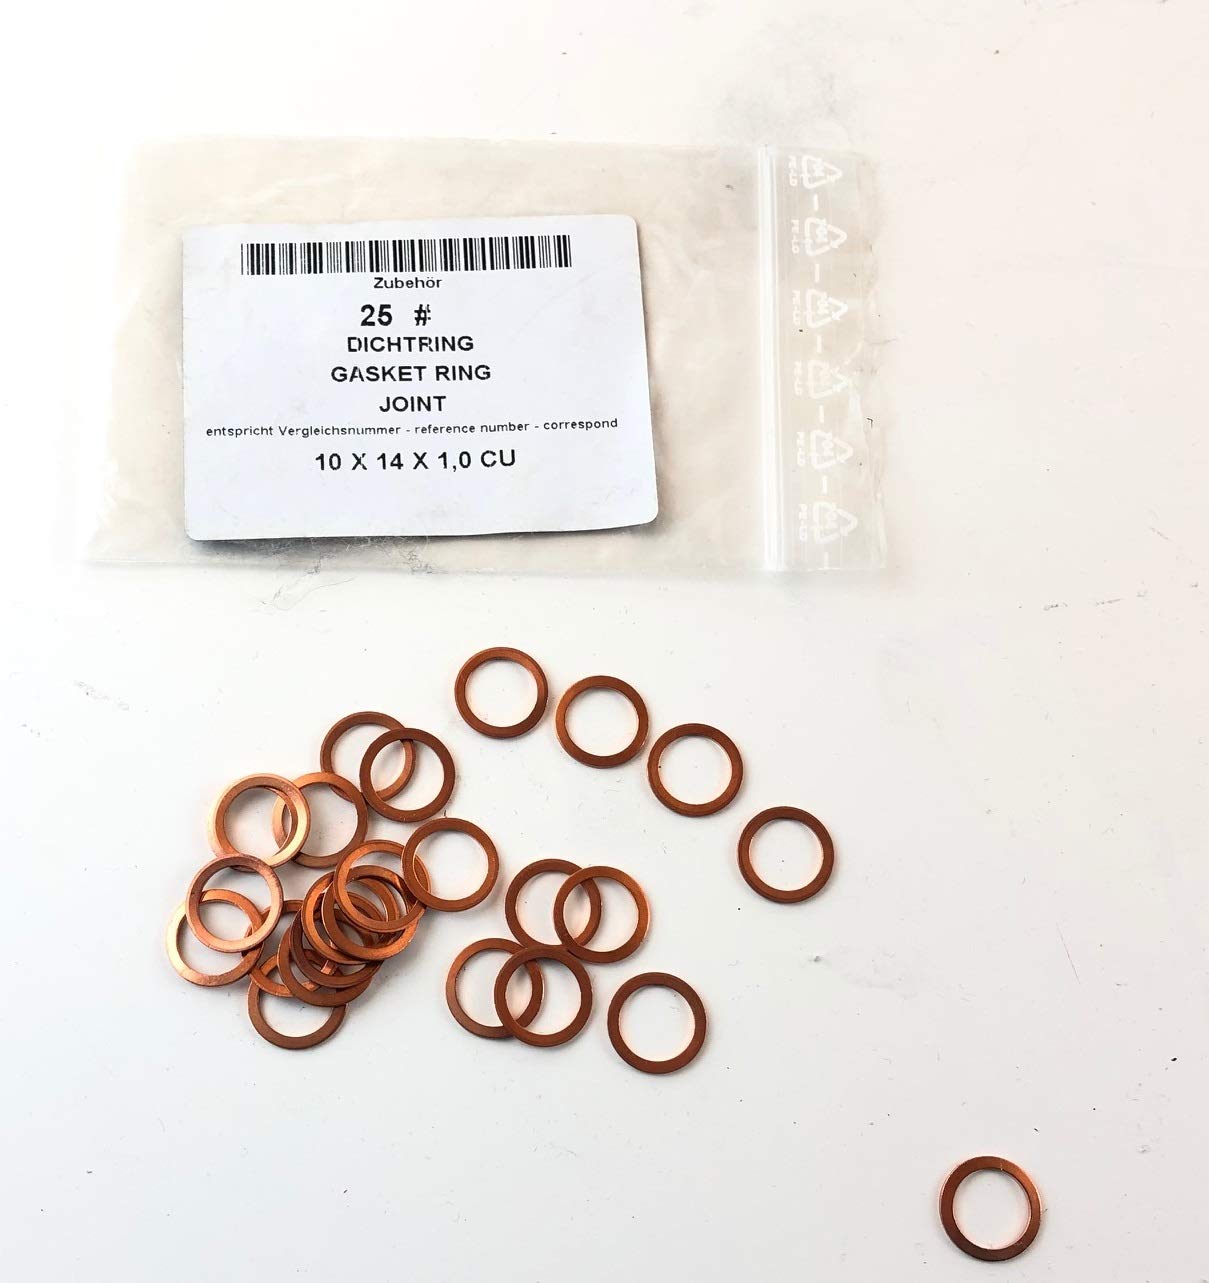 25 x Dichtring Dichtringe gasket ring joint 10 x 14 x 1,0 CU von FA1